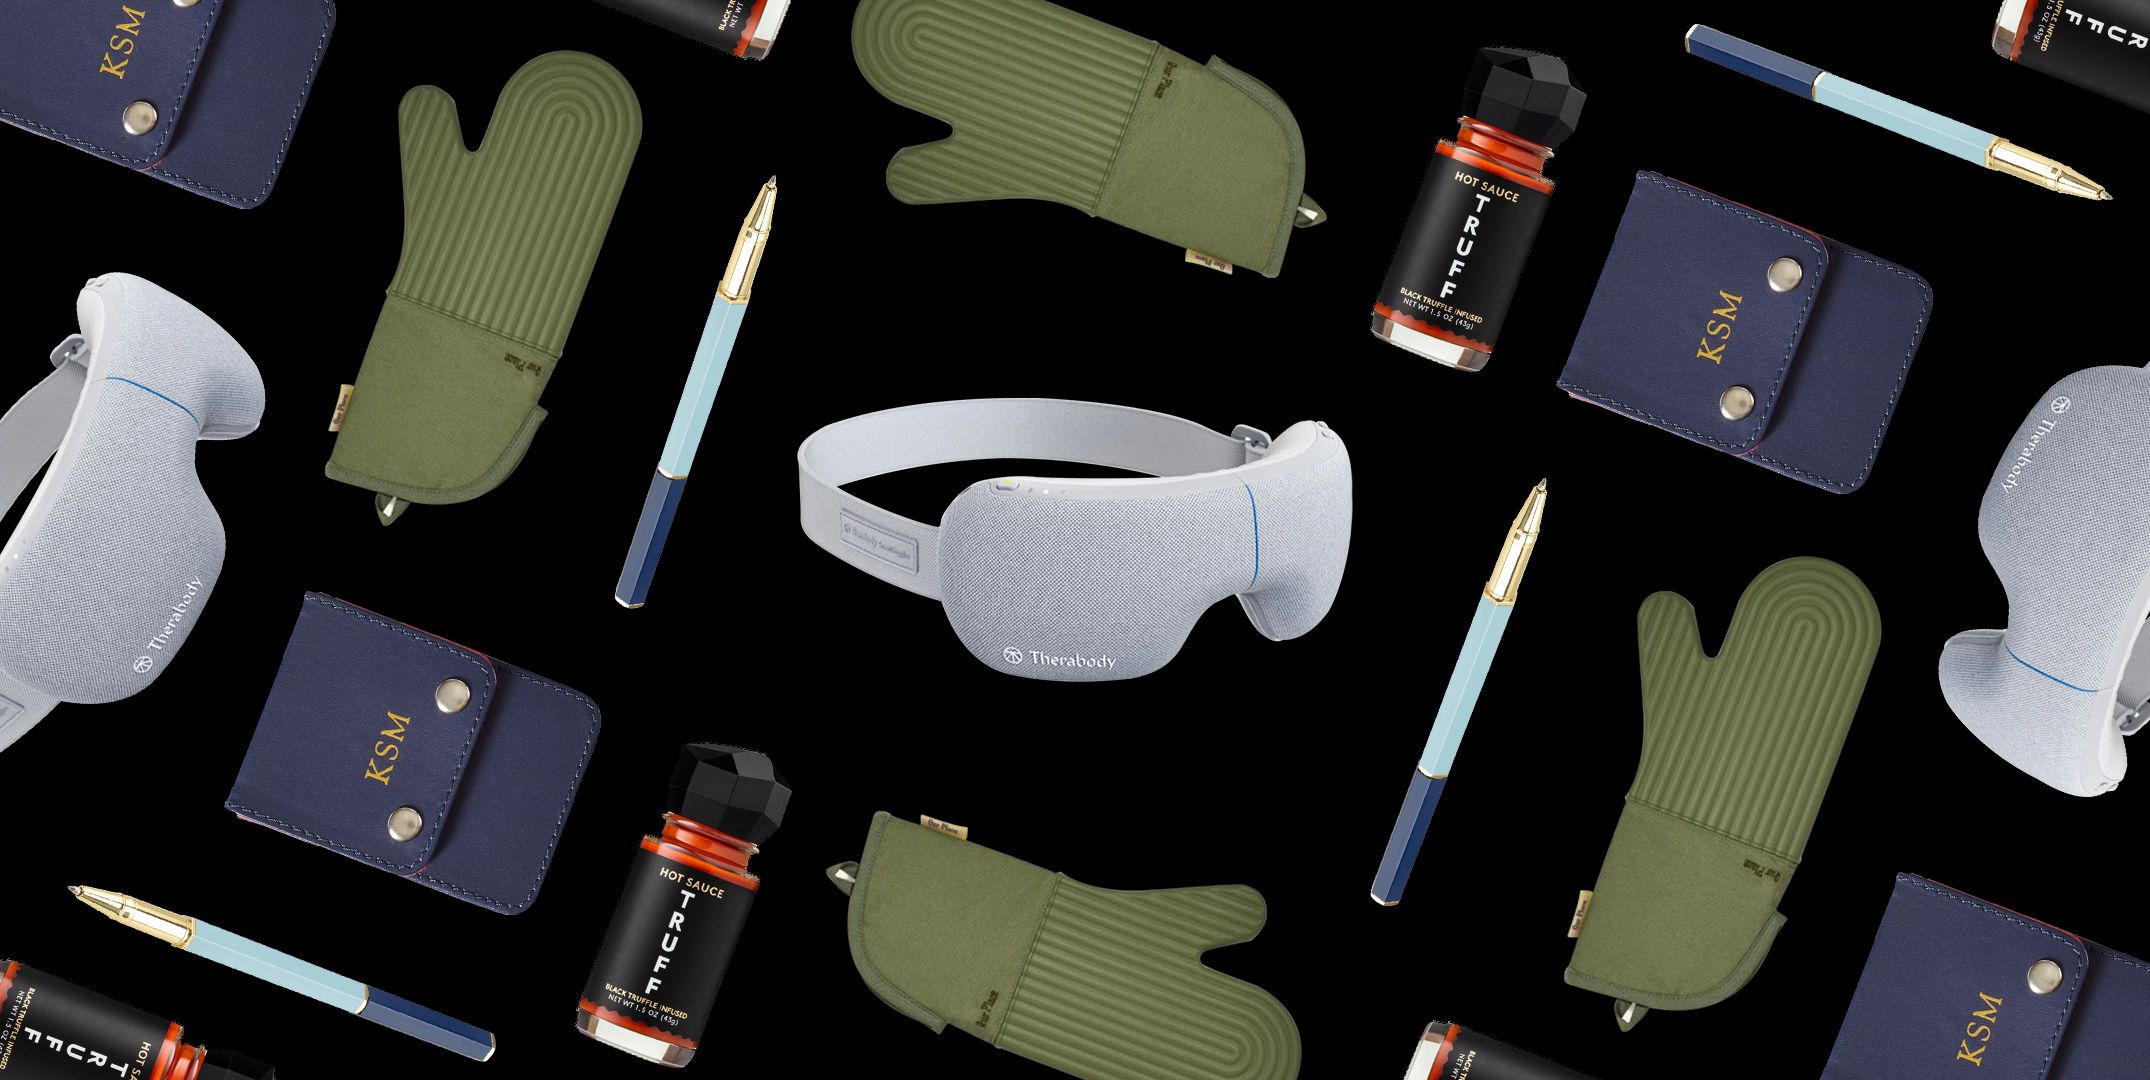 HiConsumption: The 50 Best Stocking Stuffers For Men